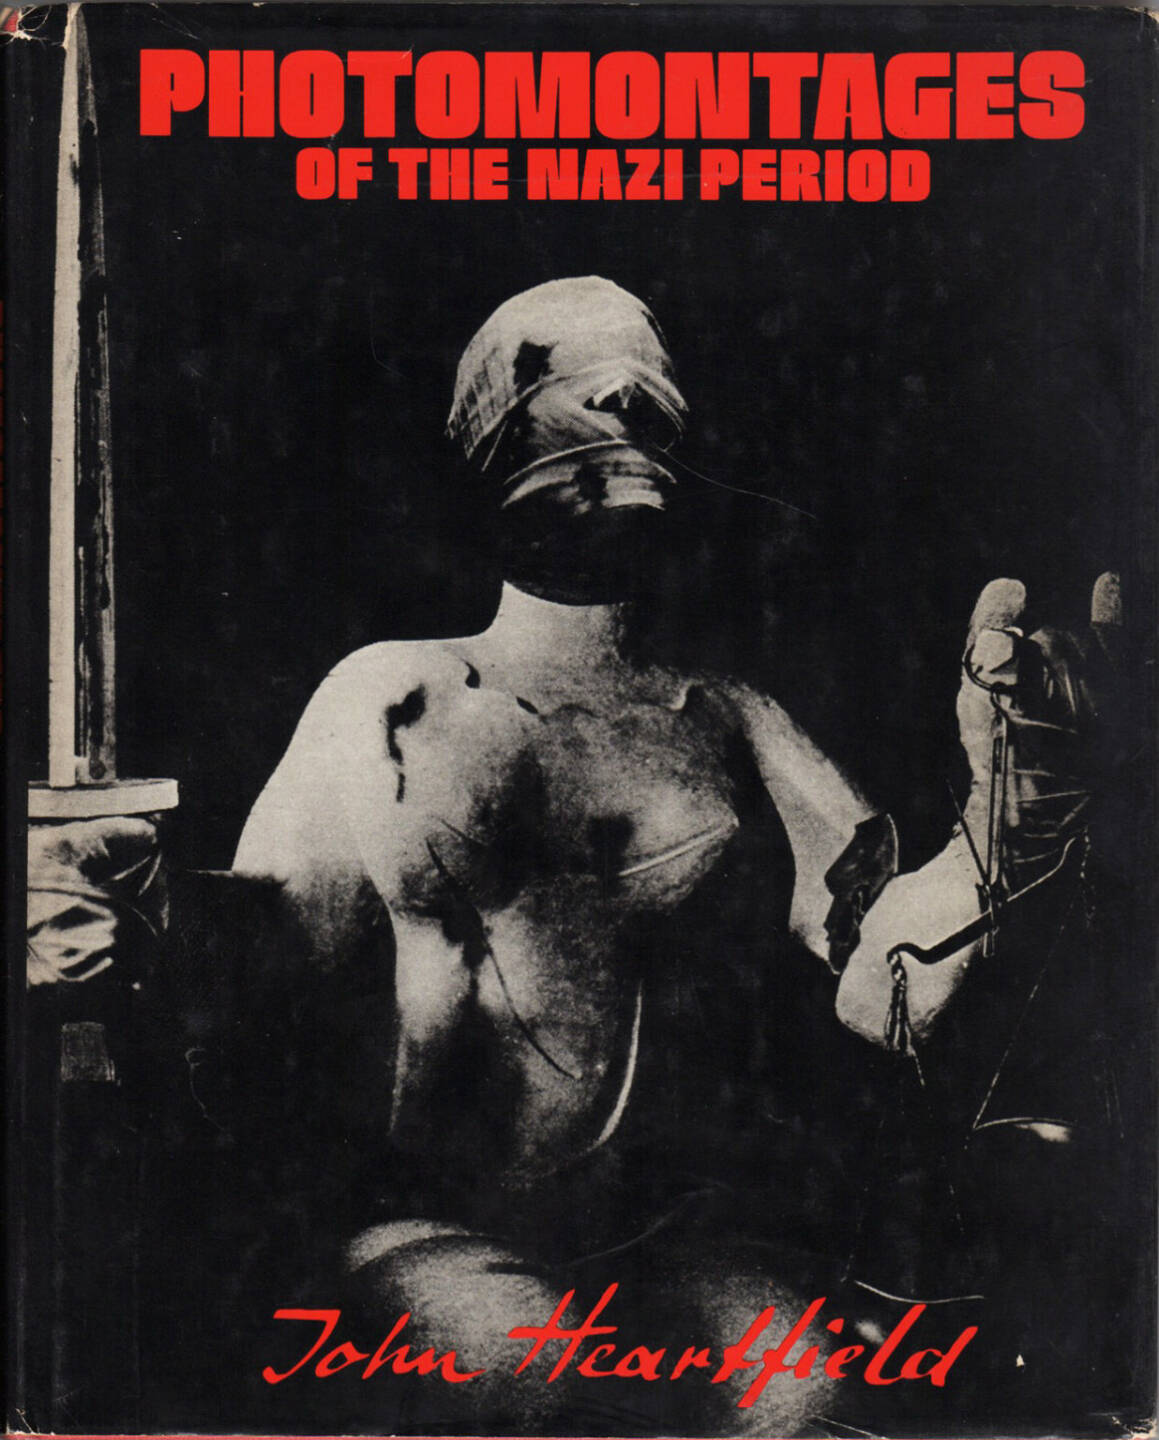 John Heartfield - Photomontages of the Nazi period, Universe Books 1977, Cover - http://josefchladek.com/book/john_heartfield_-_photomontages_of_the_nazi_period